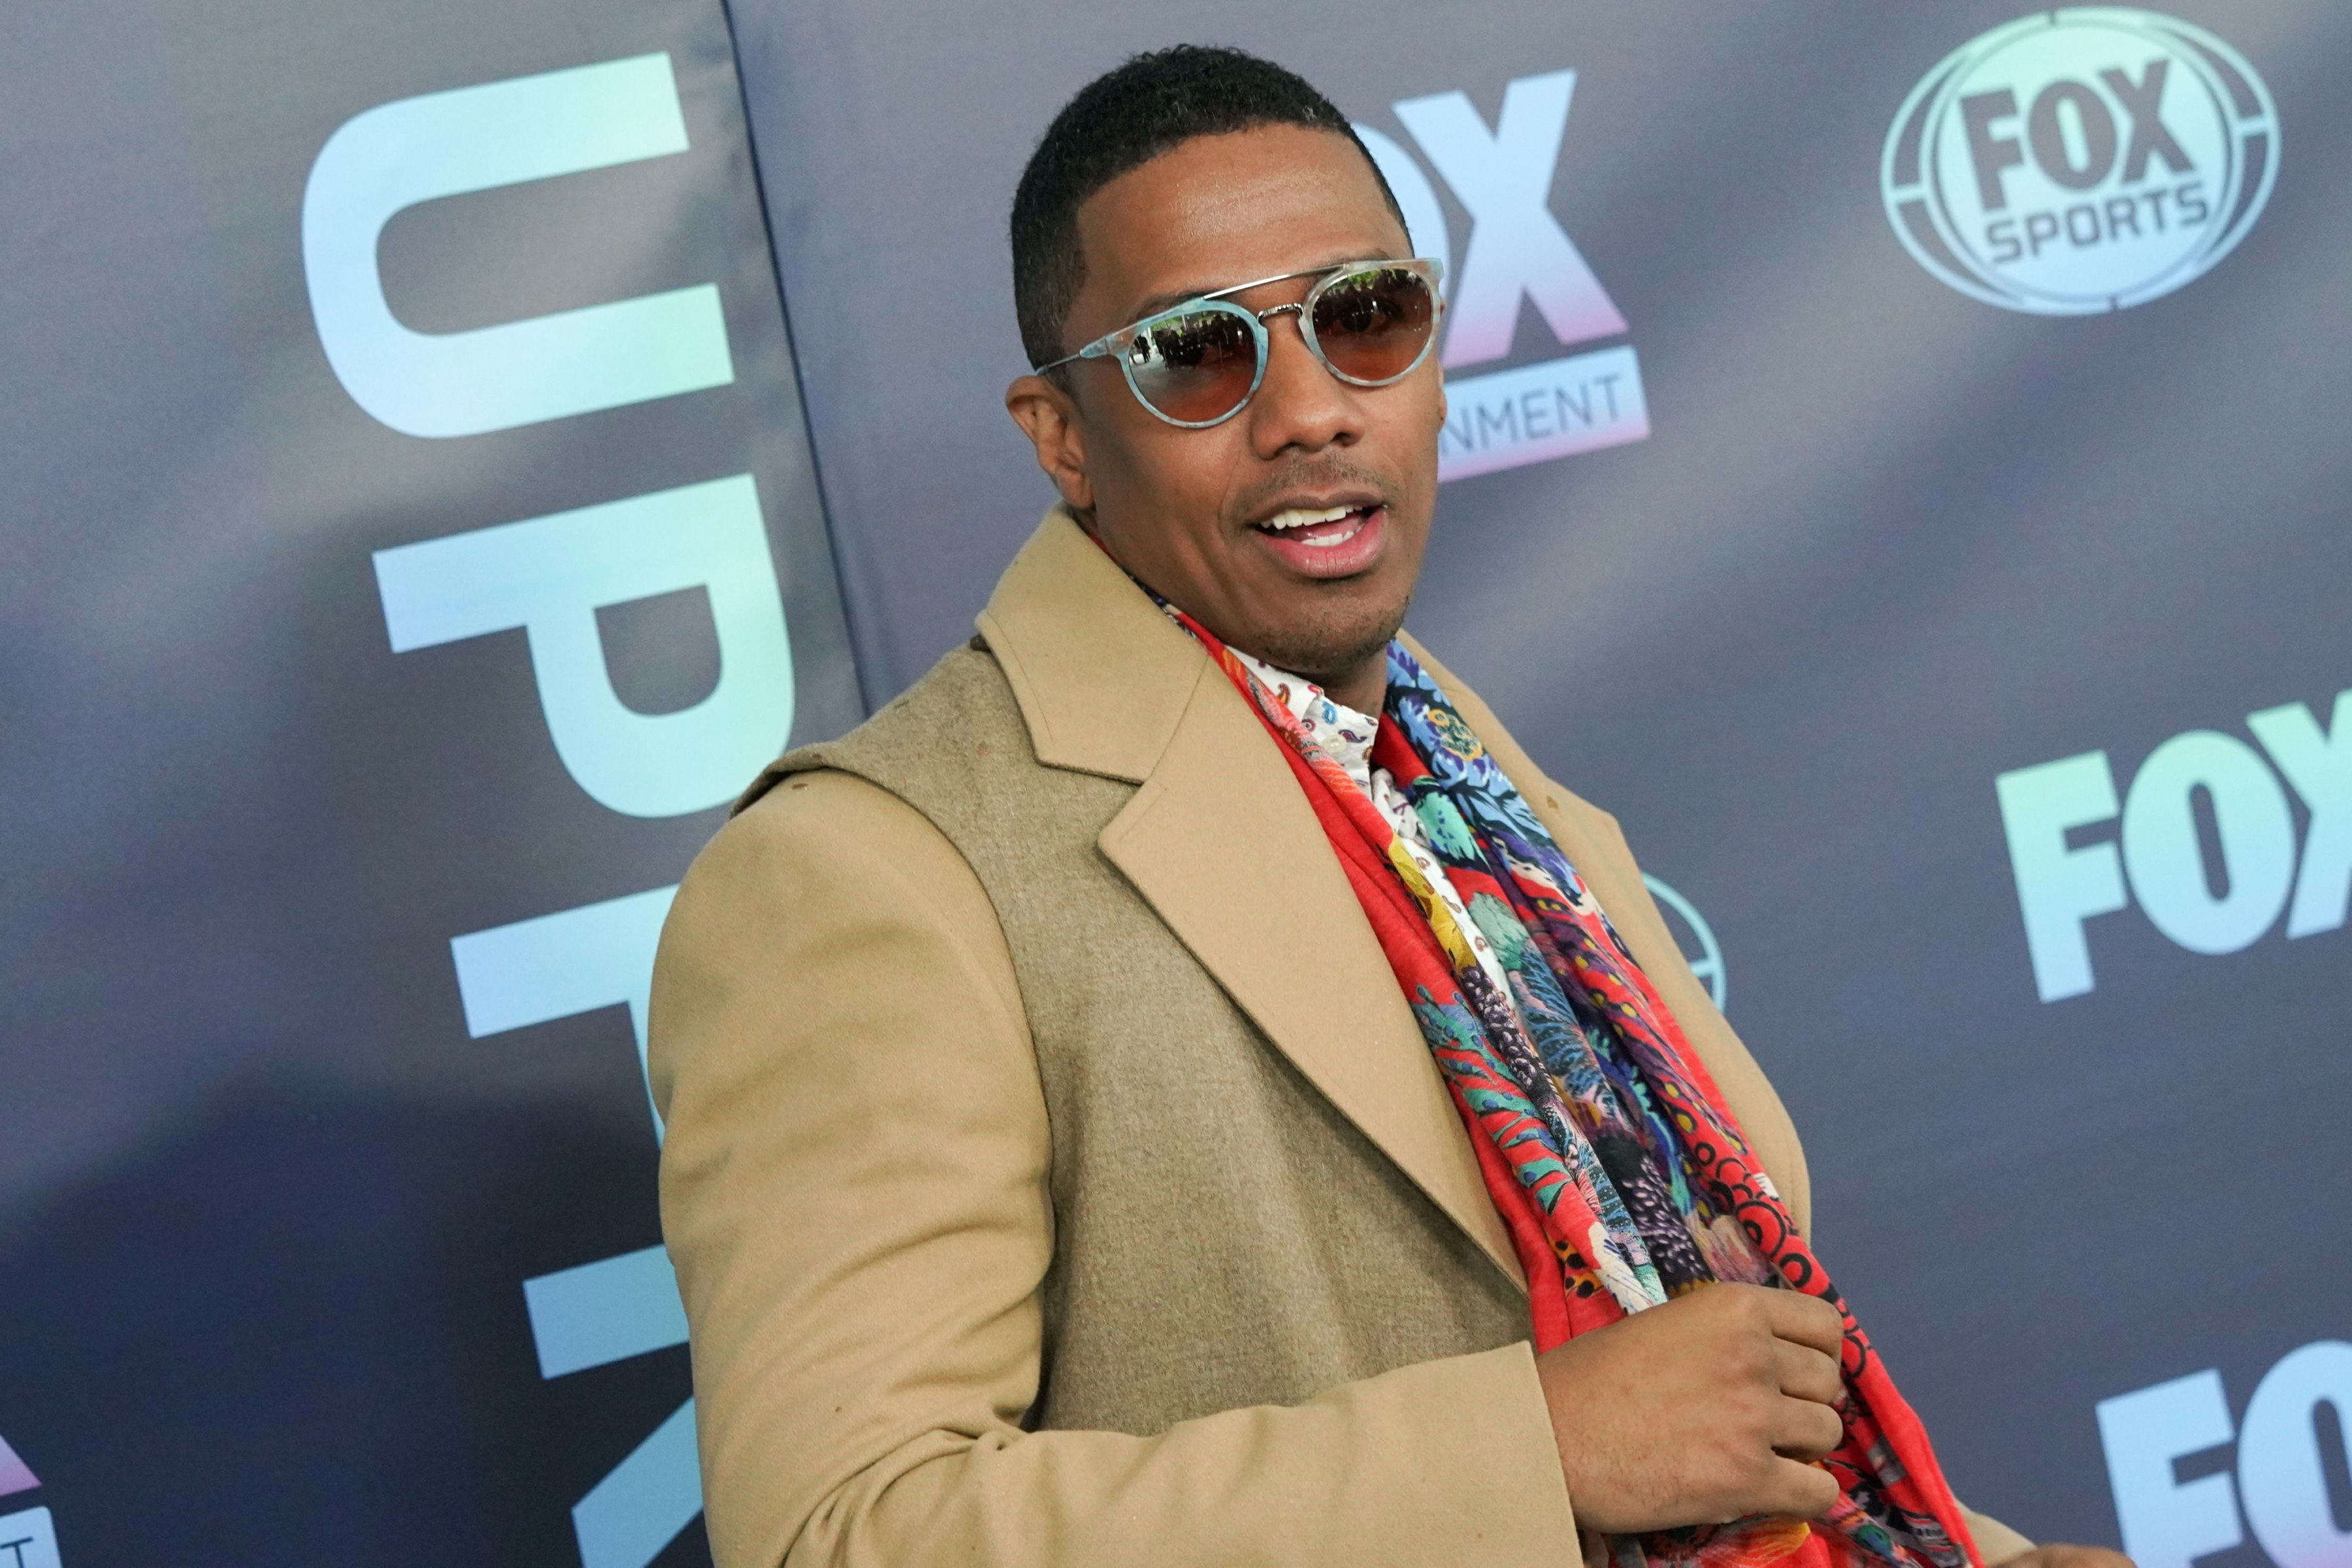 Nick Cannon said he keeps having kids as he'll probably 'die soon'